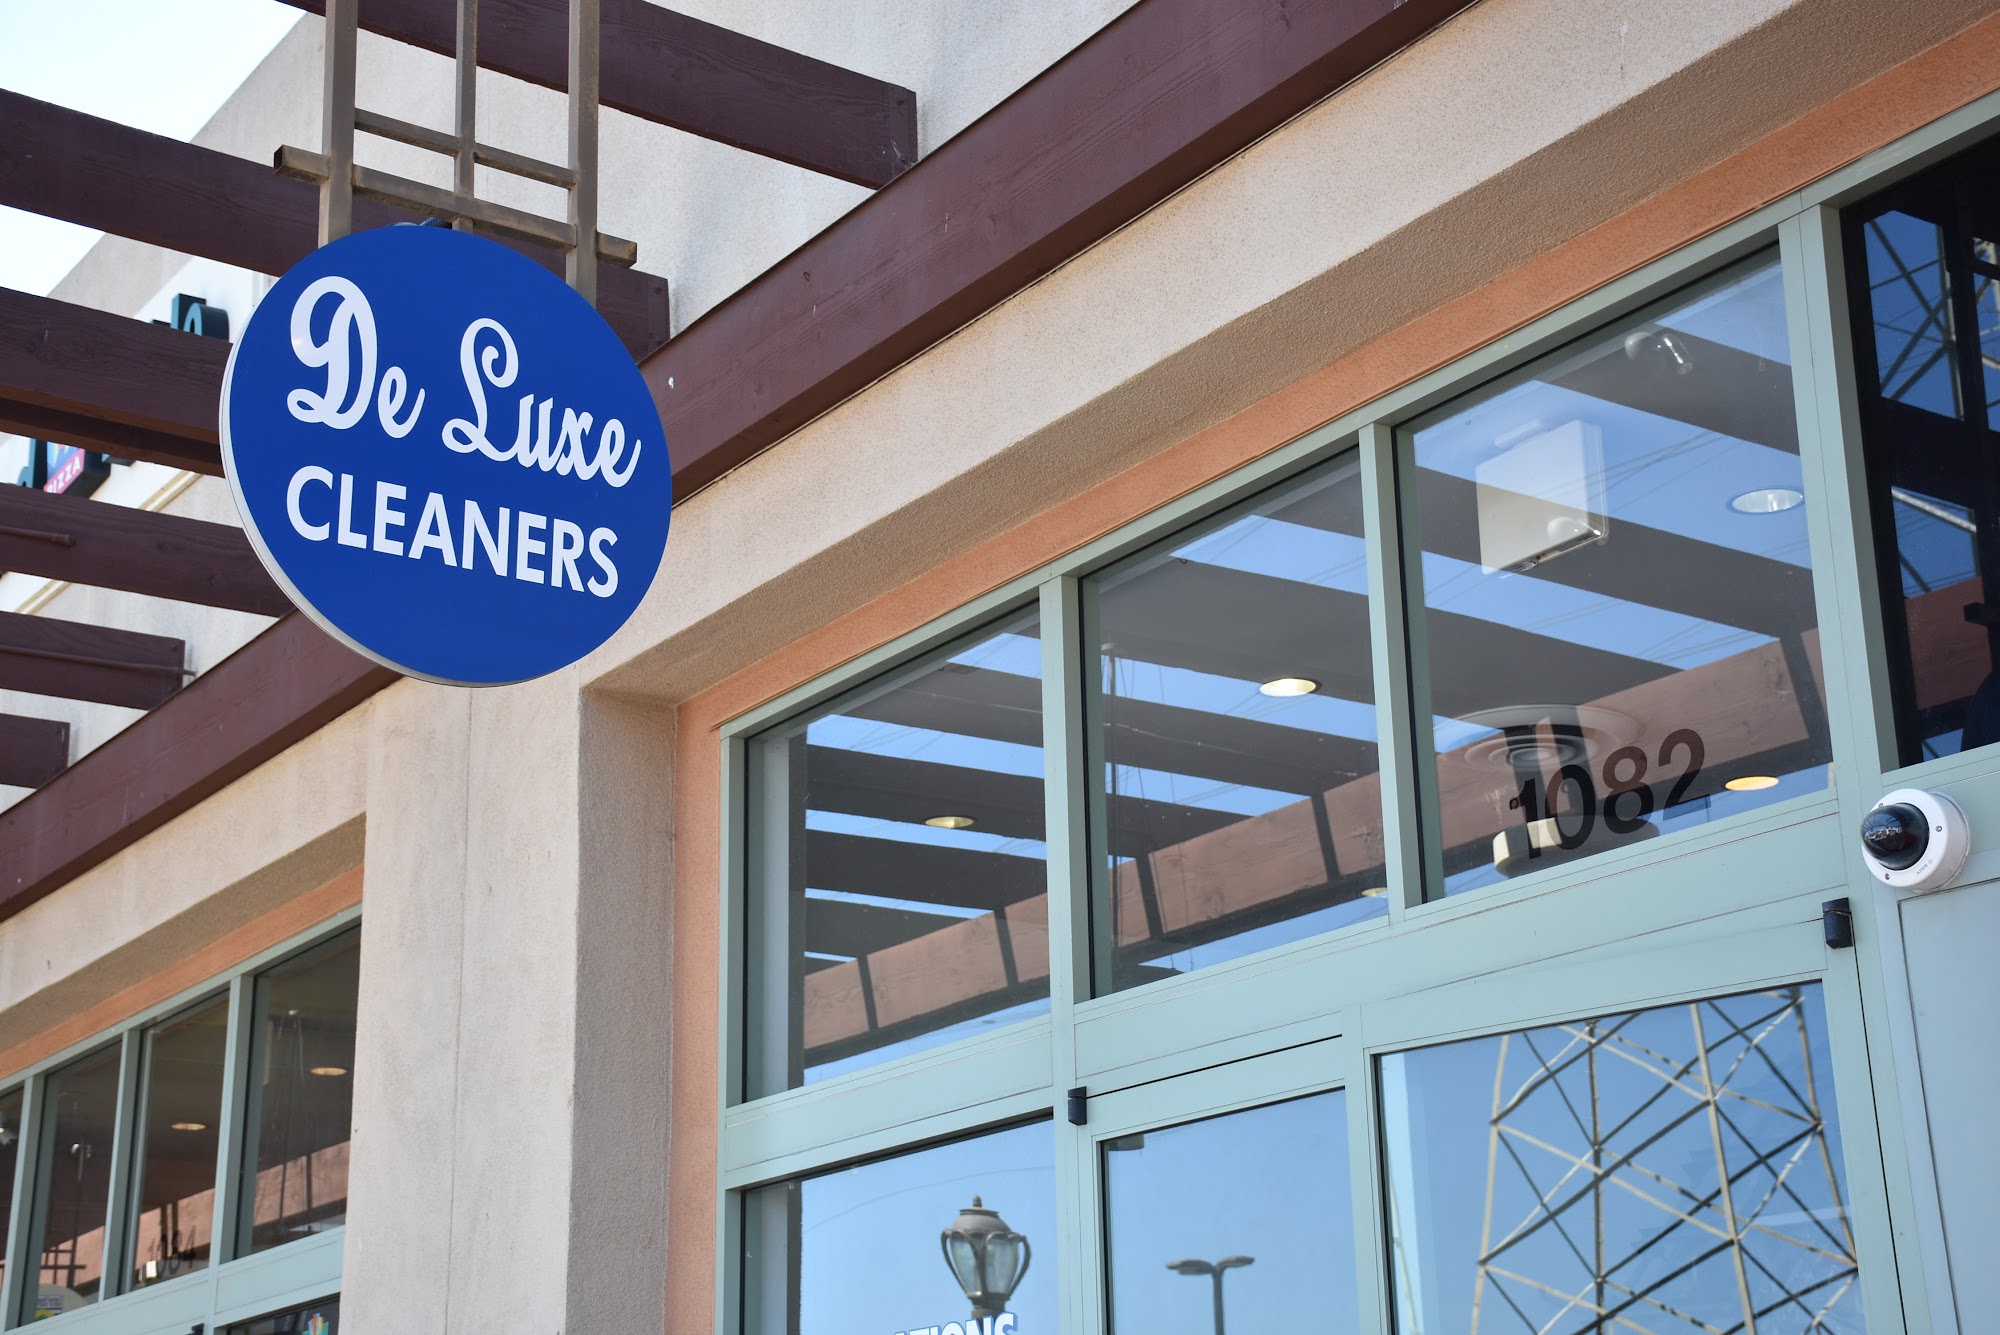 De luxe Cleaners 1082 Foster City Blvd, Foster City California 94404